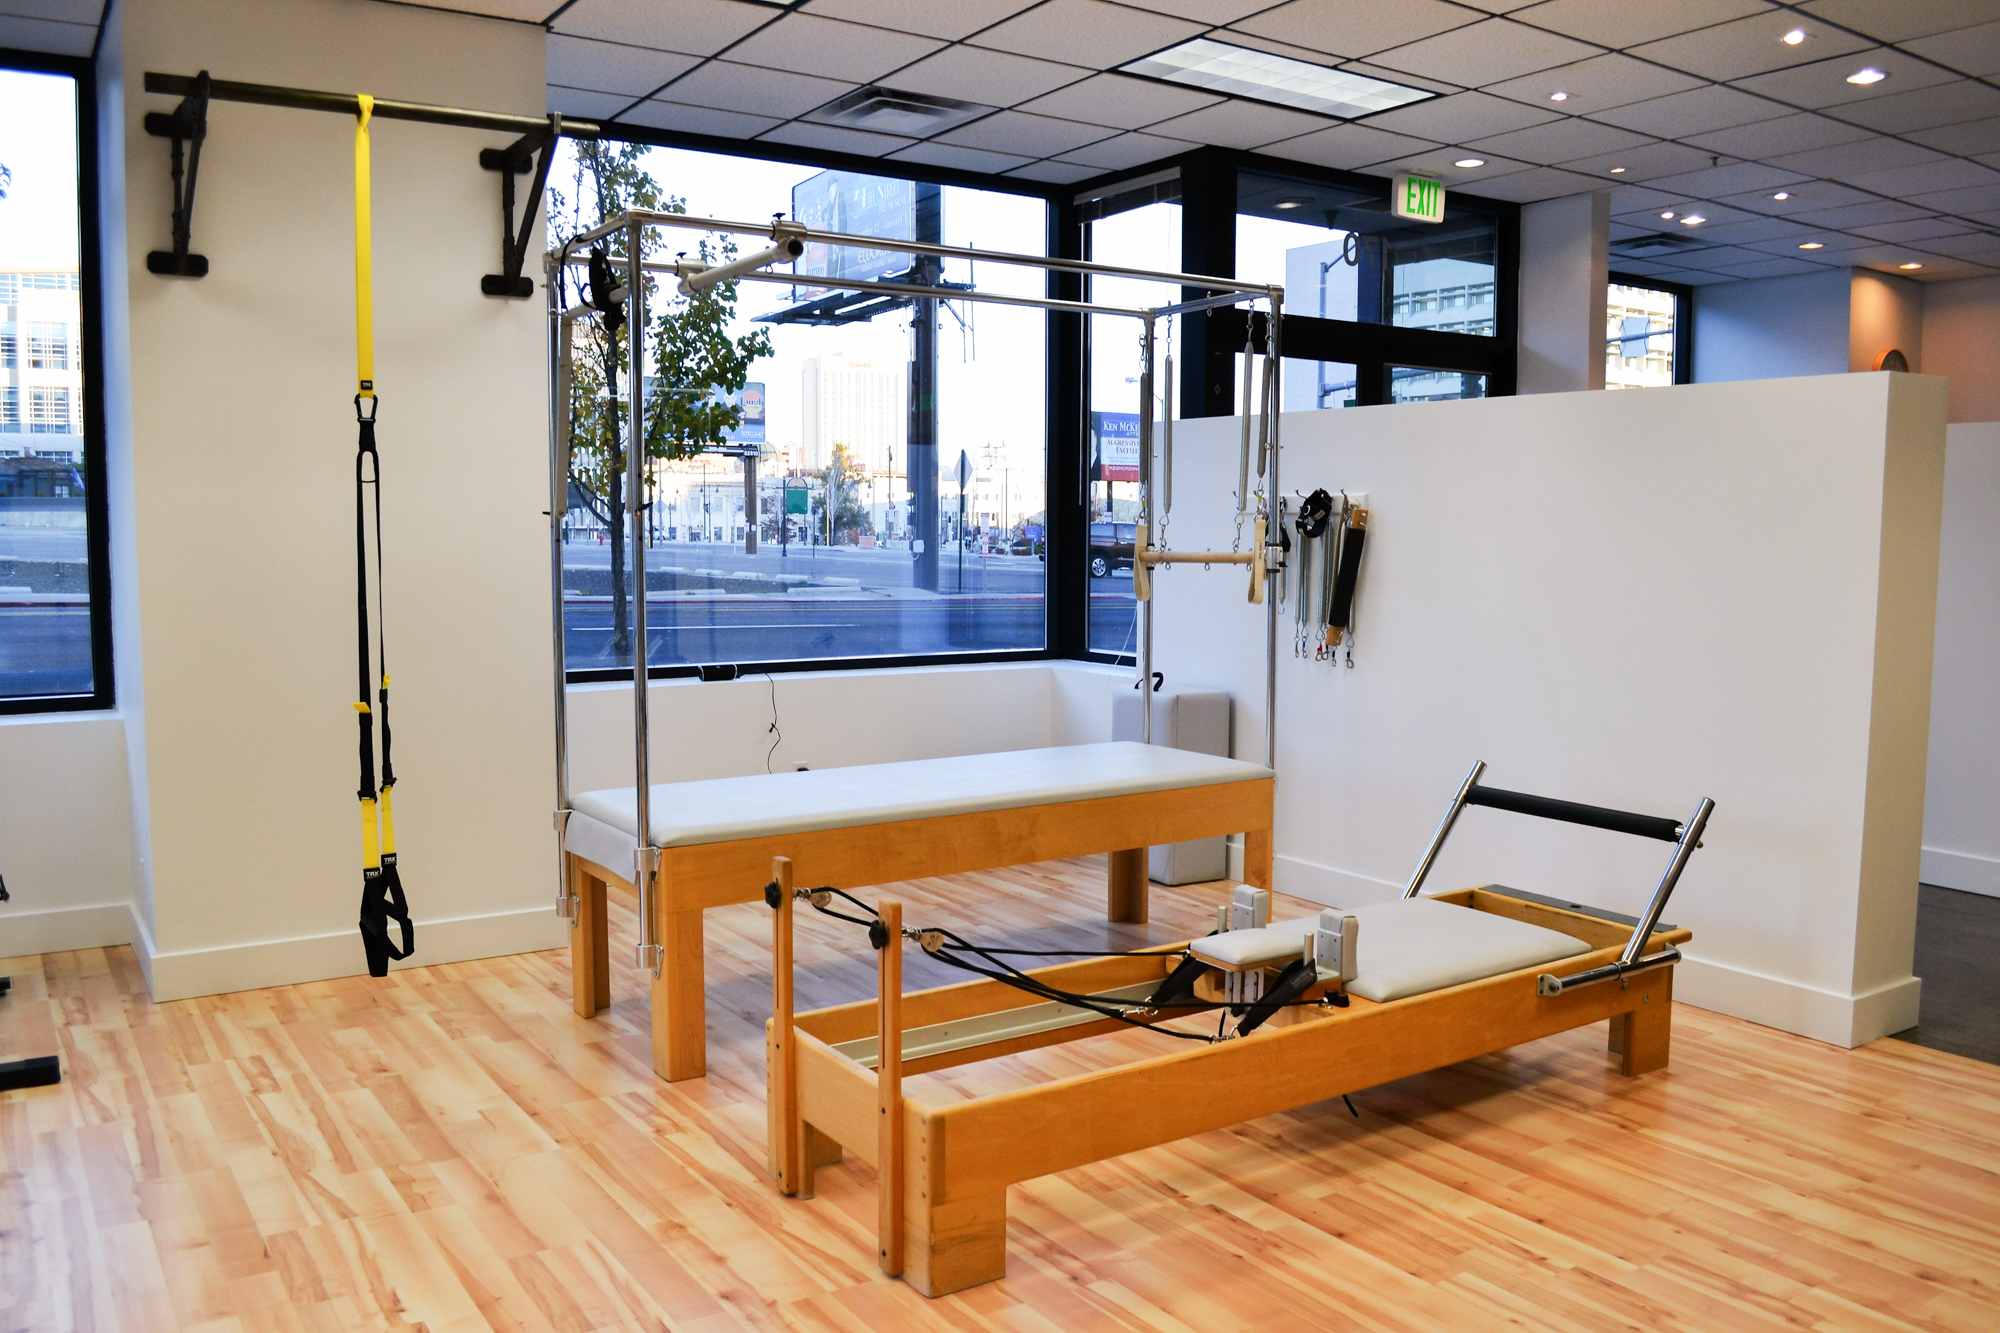 Photograph of the equipment tables at Sports and Performance Physical Therapy.